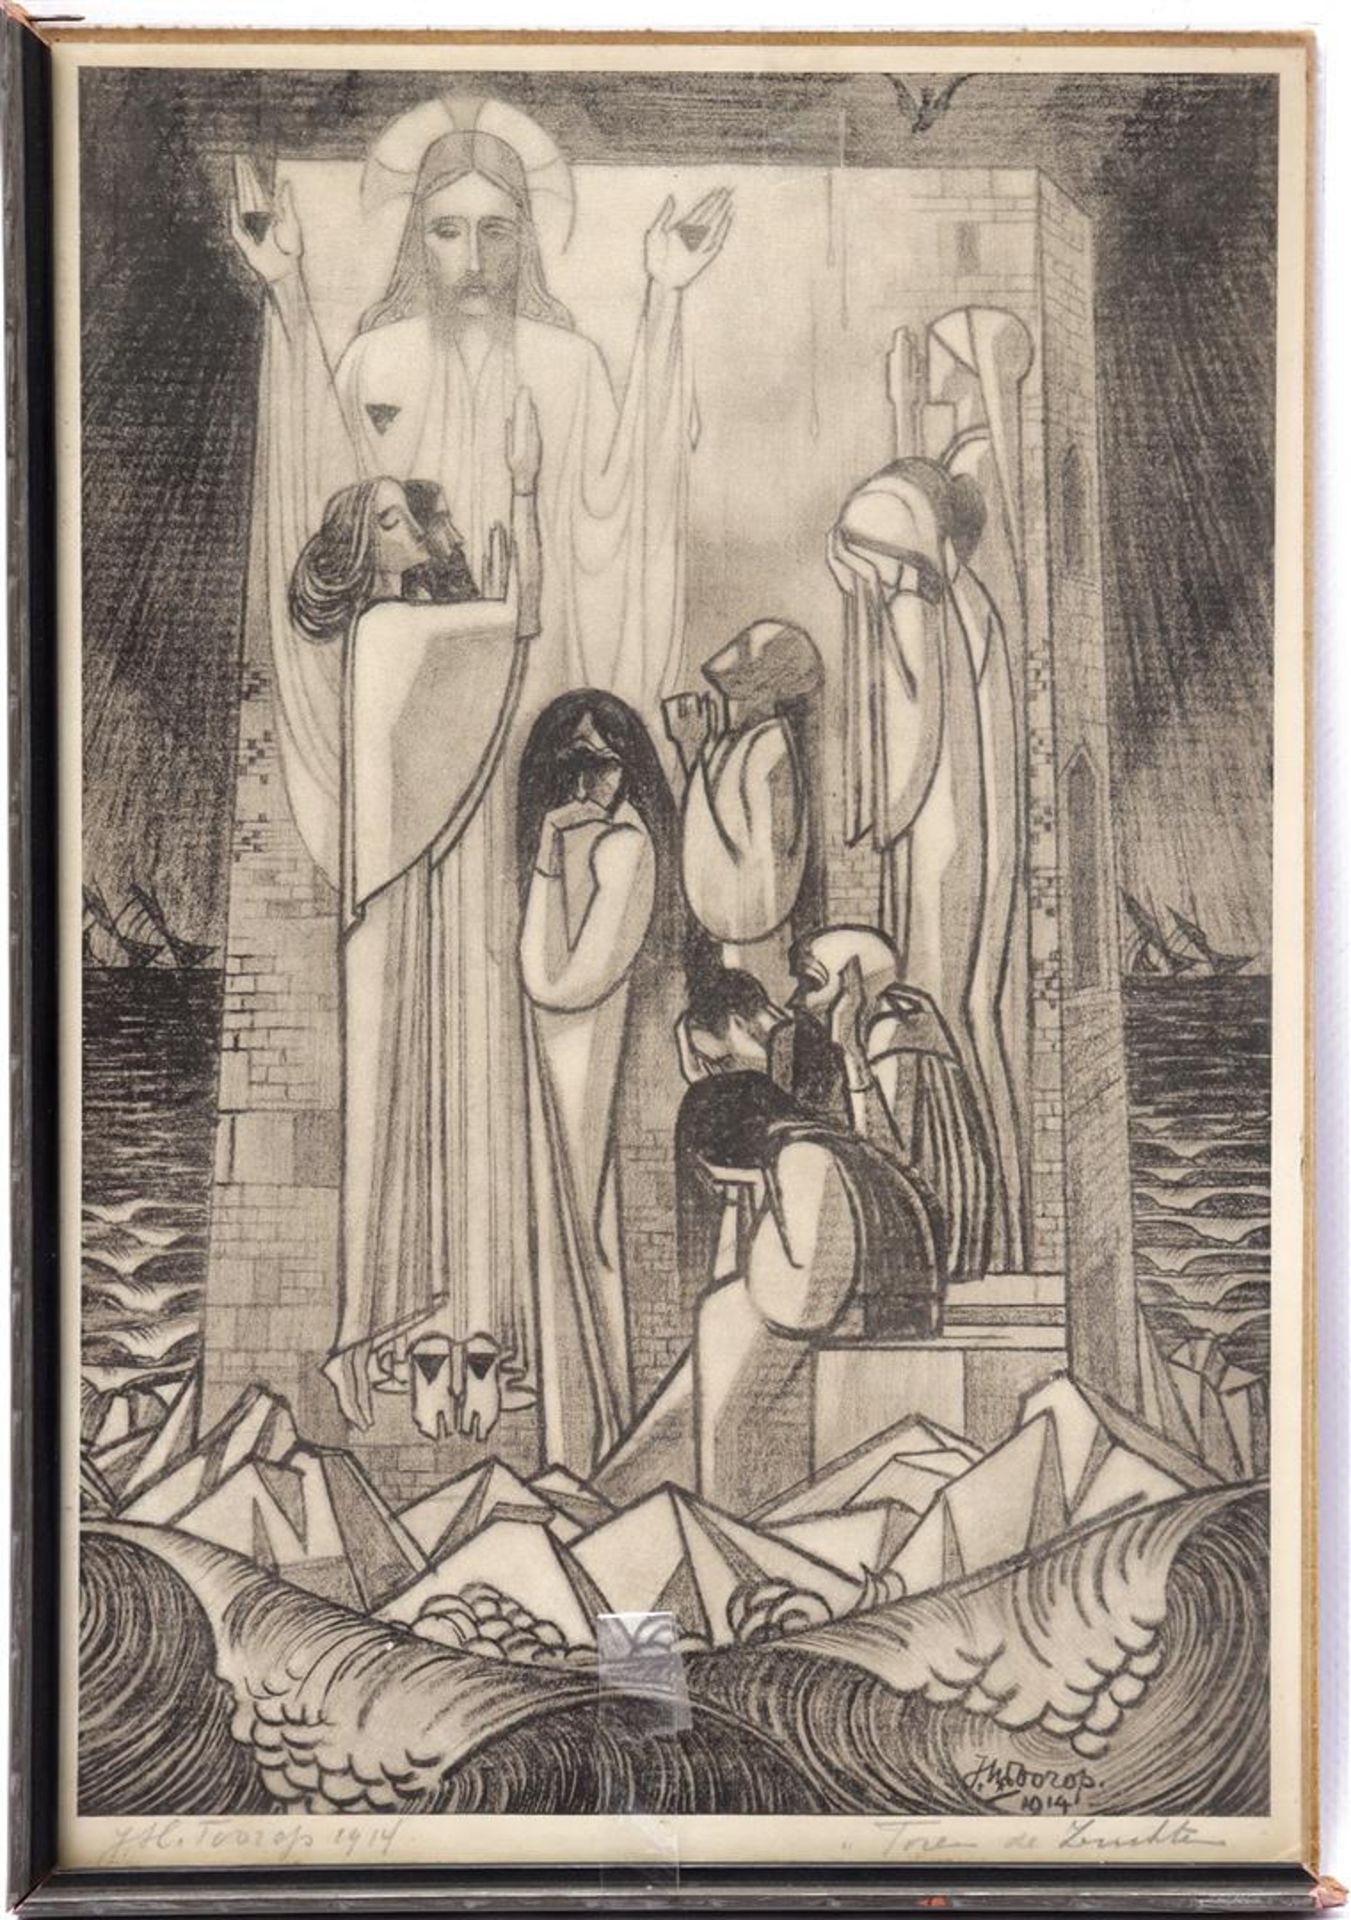 Lithograph after the work of Jan Toorop